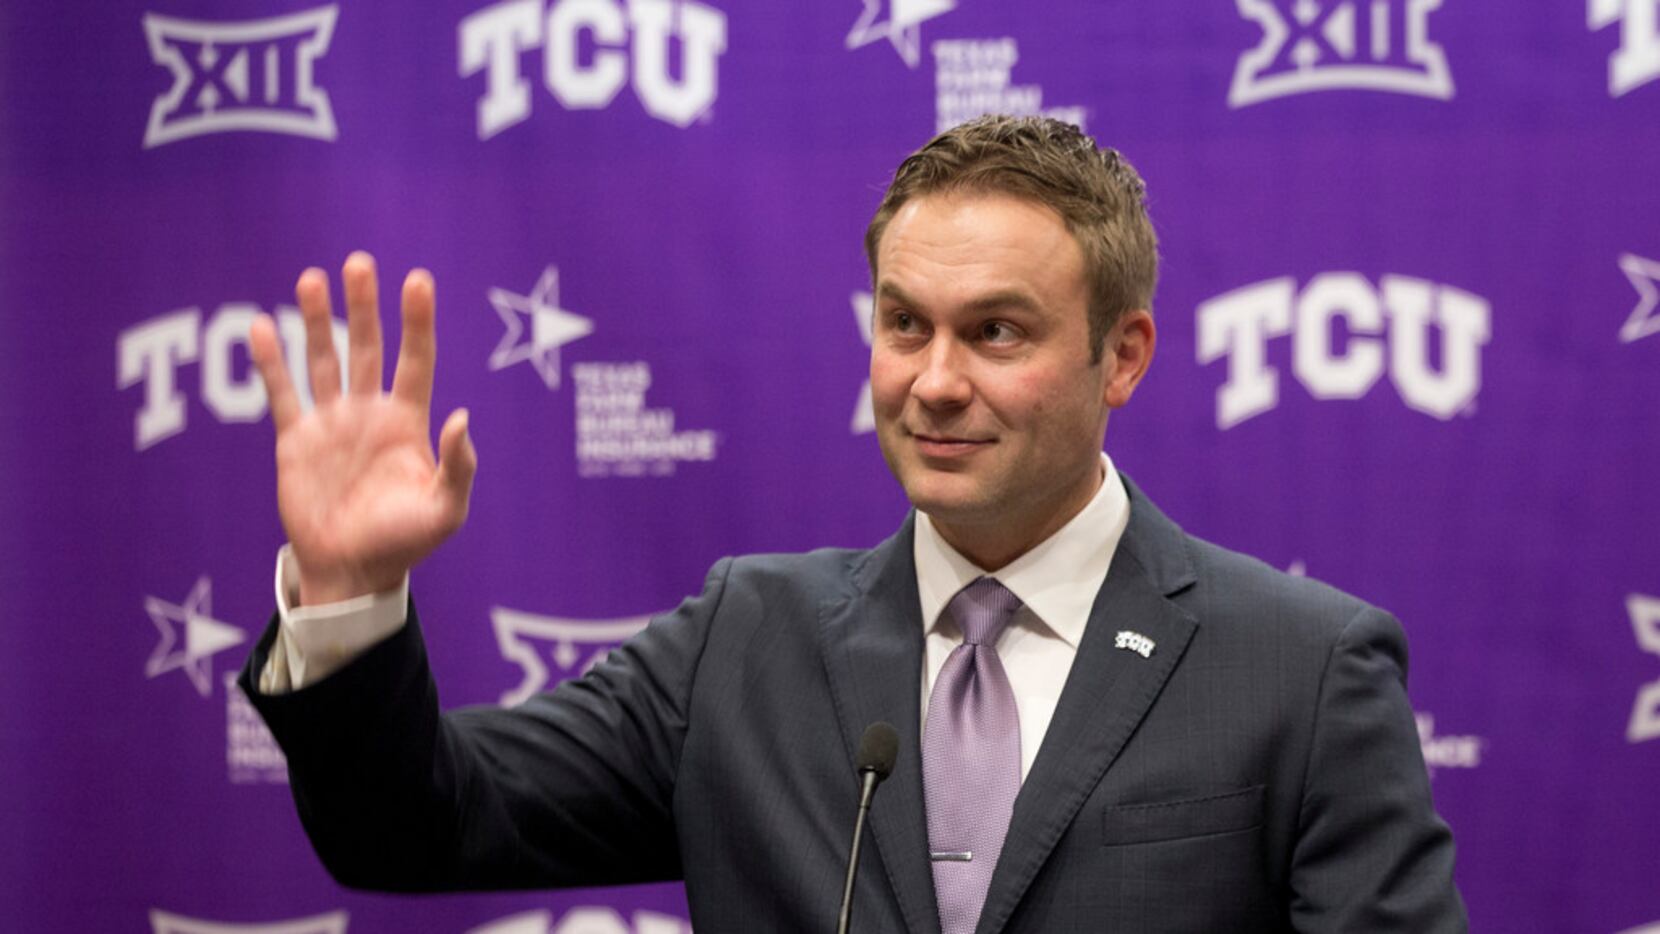 TCU announced Jeremiah Donati as its next athletic director at a press conference Monday,...